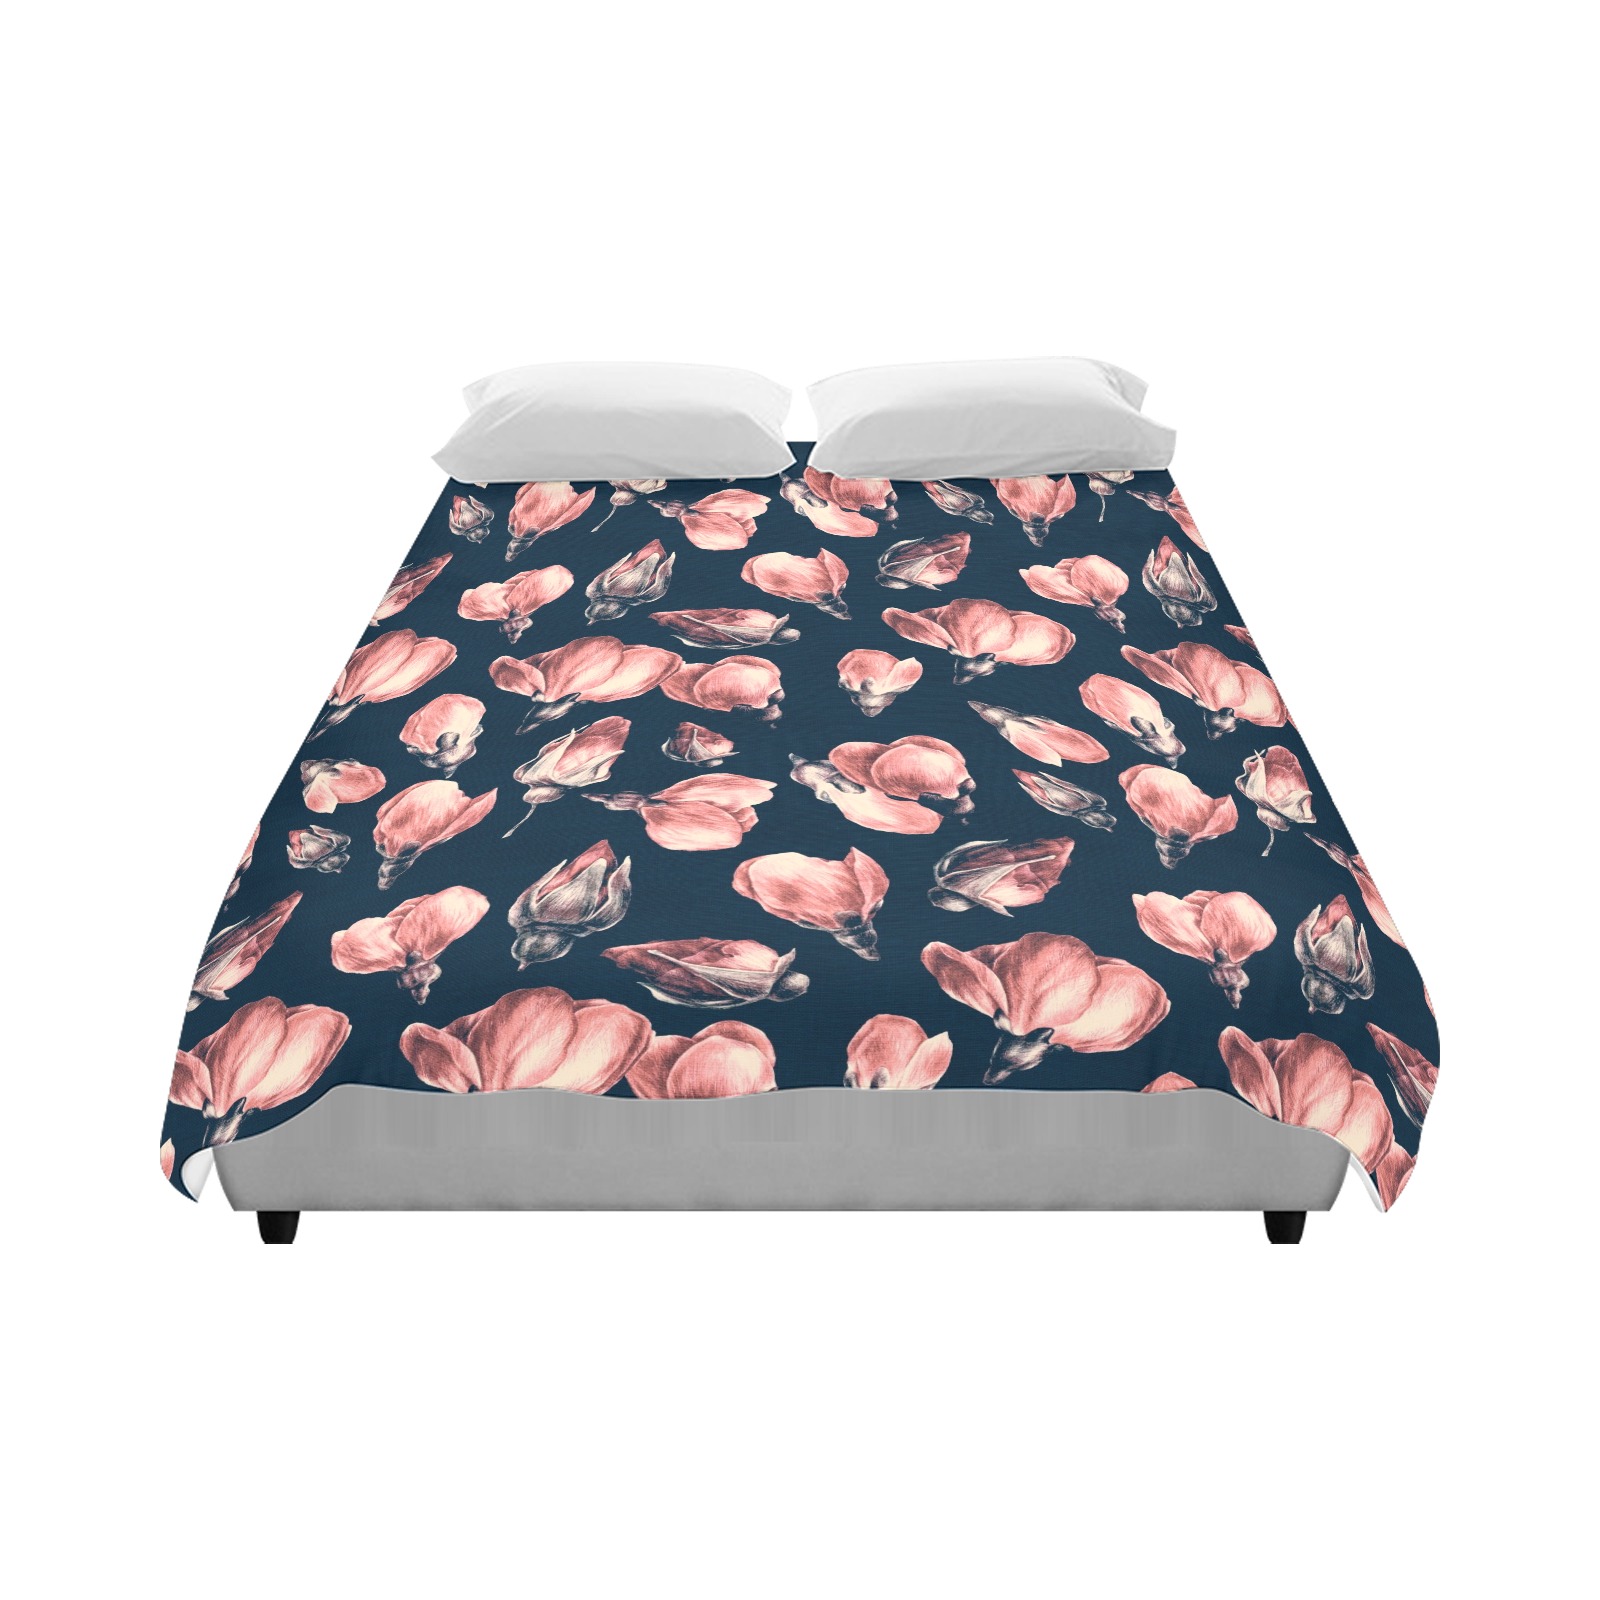 Tulips, large print Duvet Cover 86"x70" ( All-over-print)